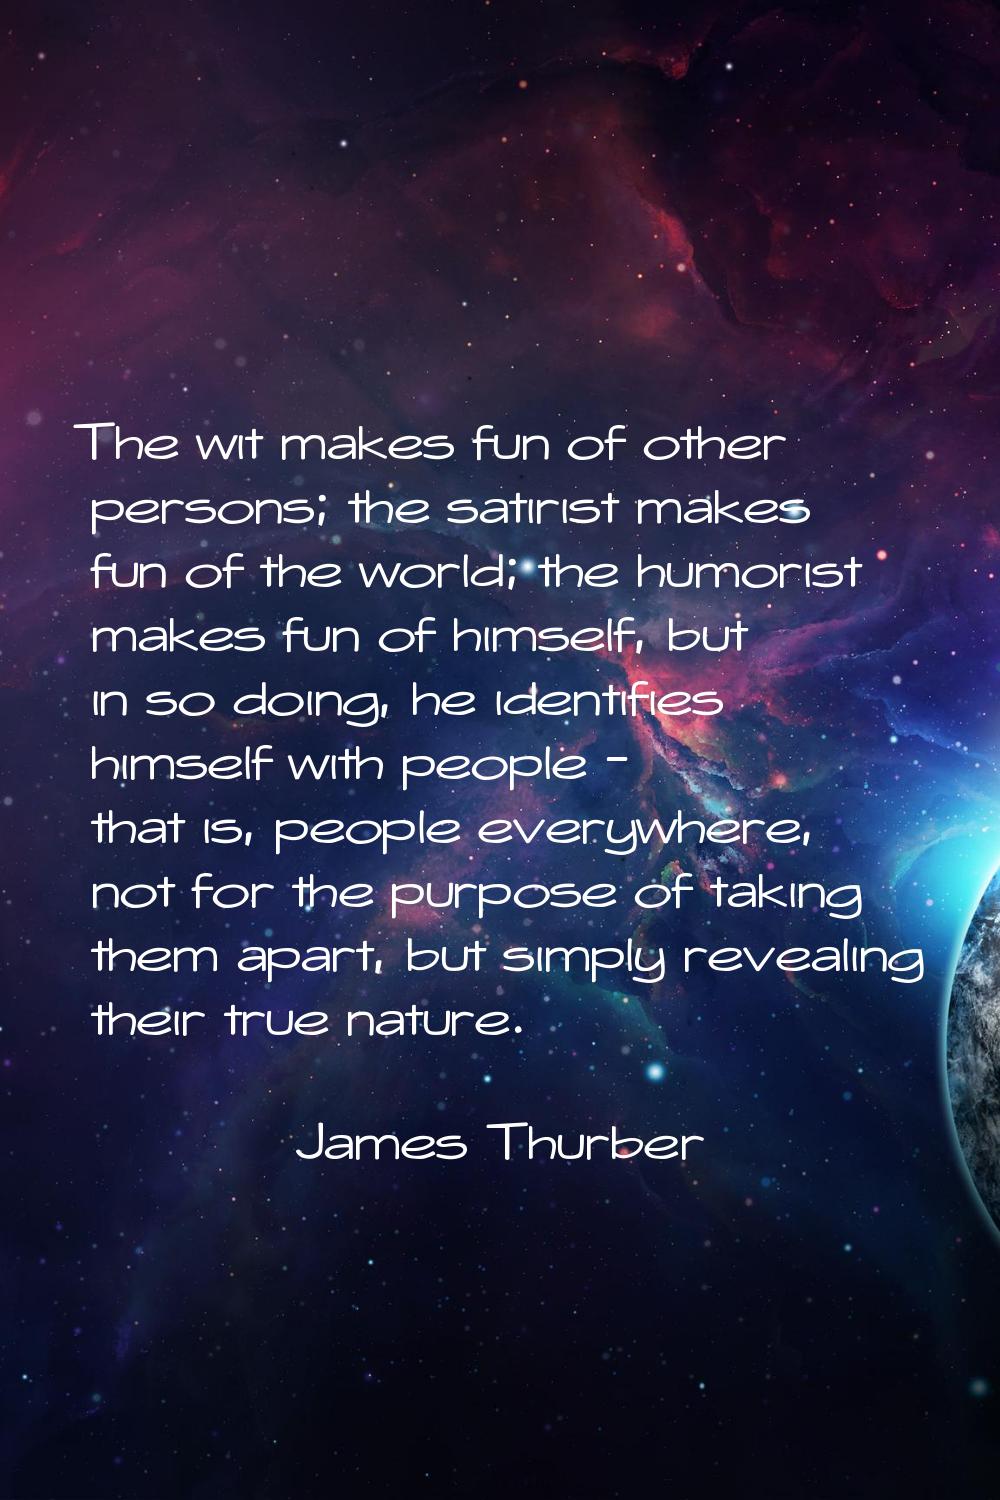 The wit makes fun of other persons; the satirist makes fun of the world; the humorist makes fun of 